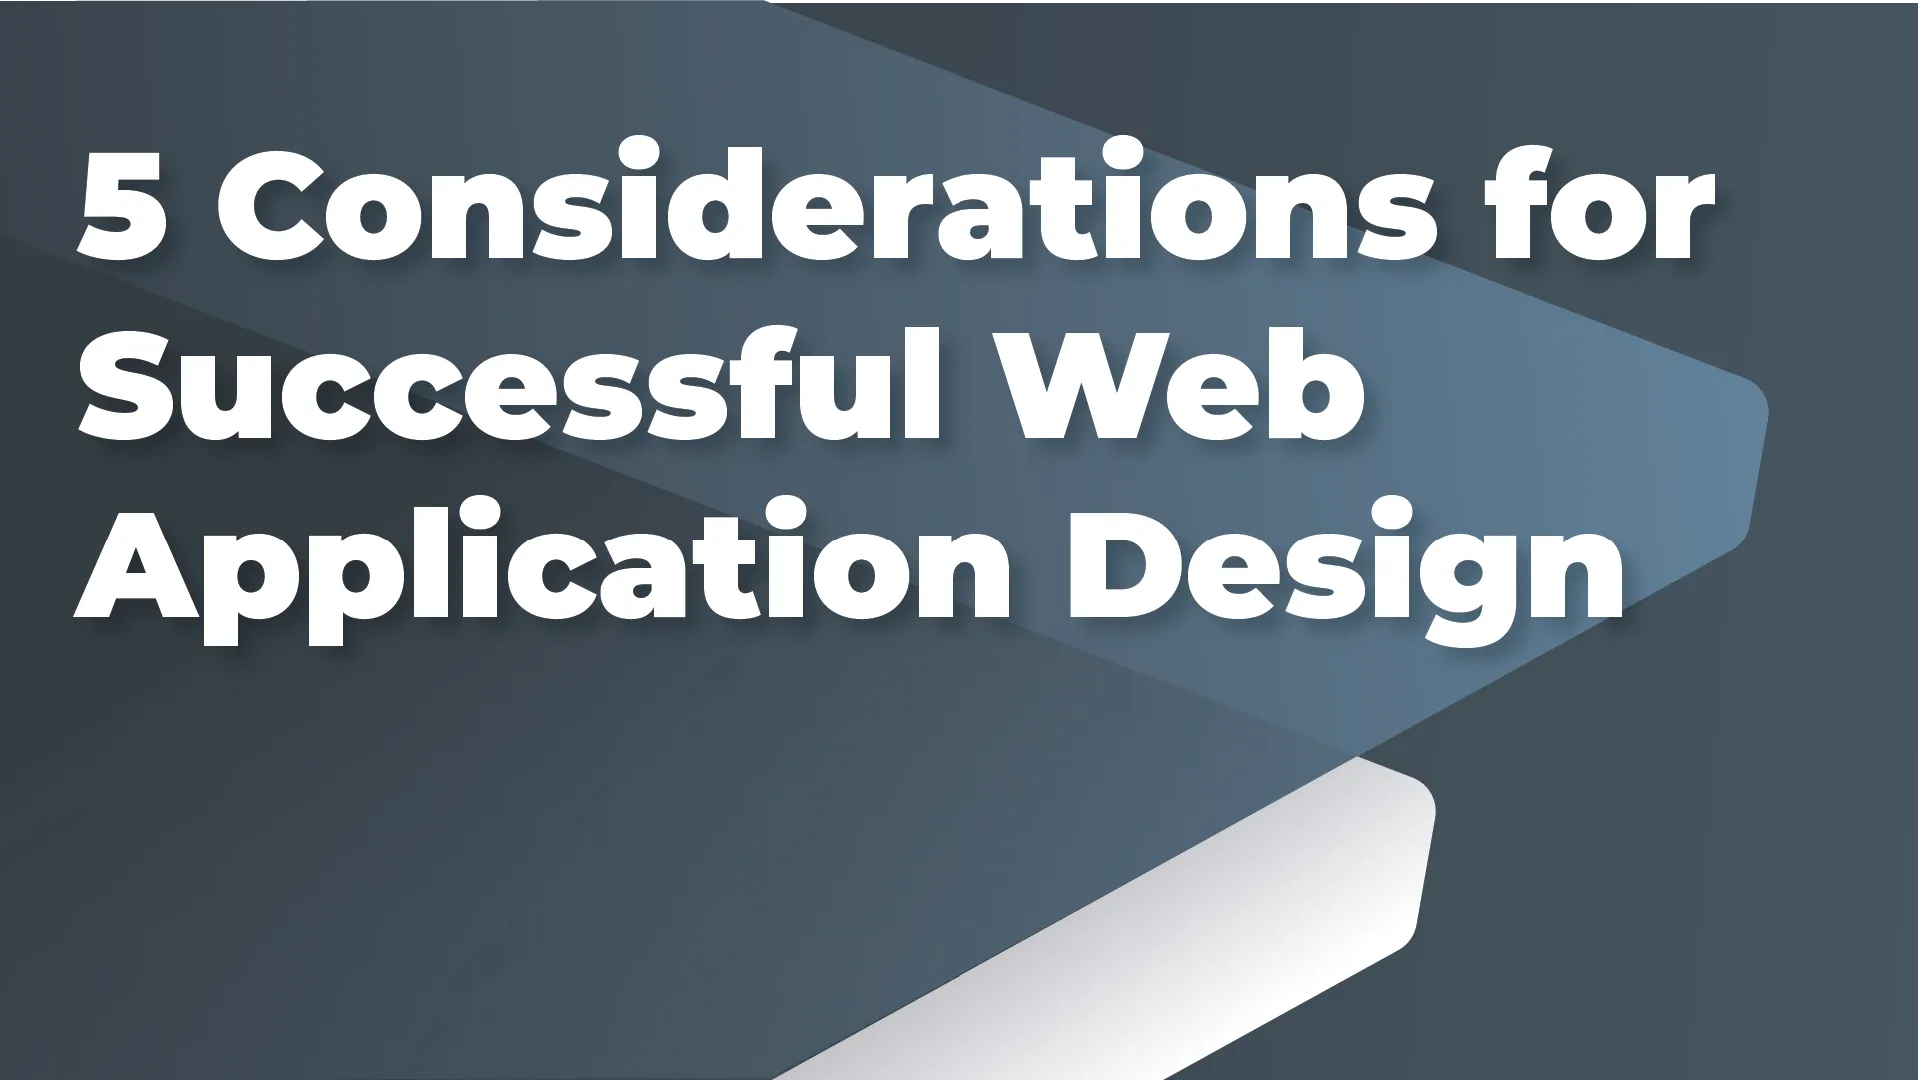 5 Considerations for Successful Web Application Design